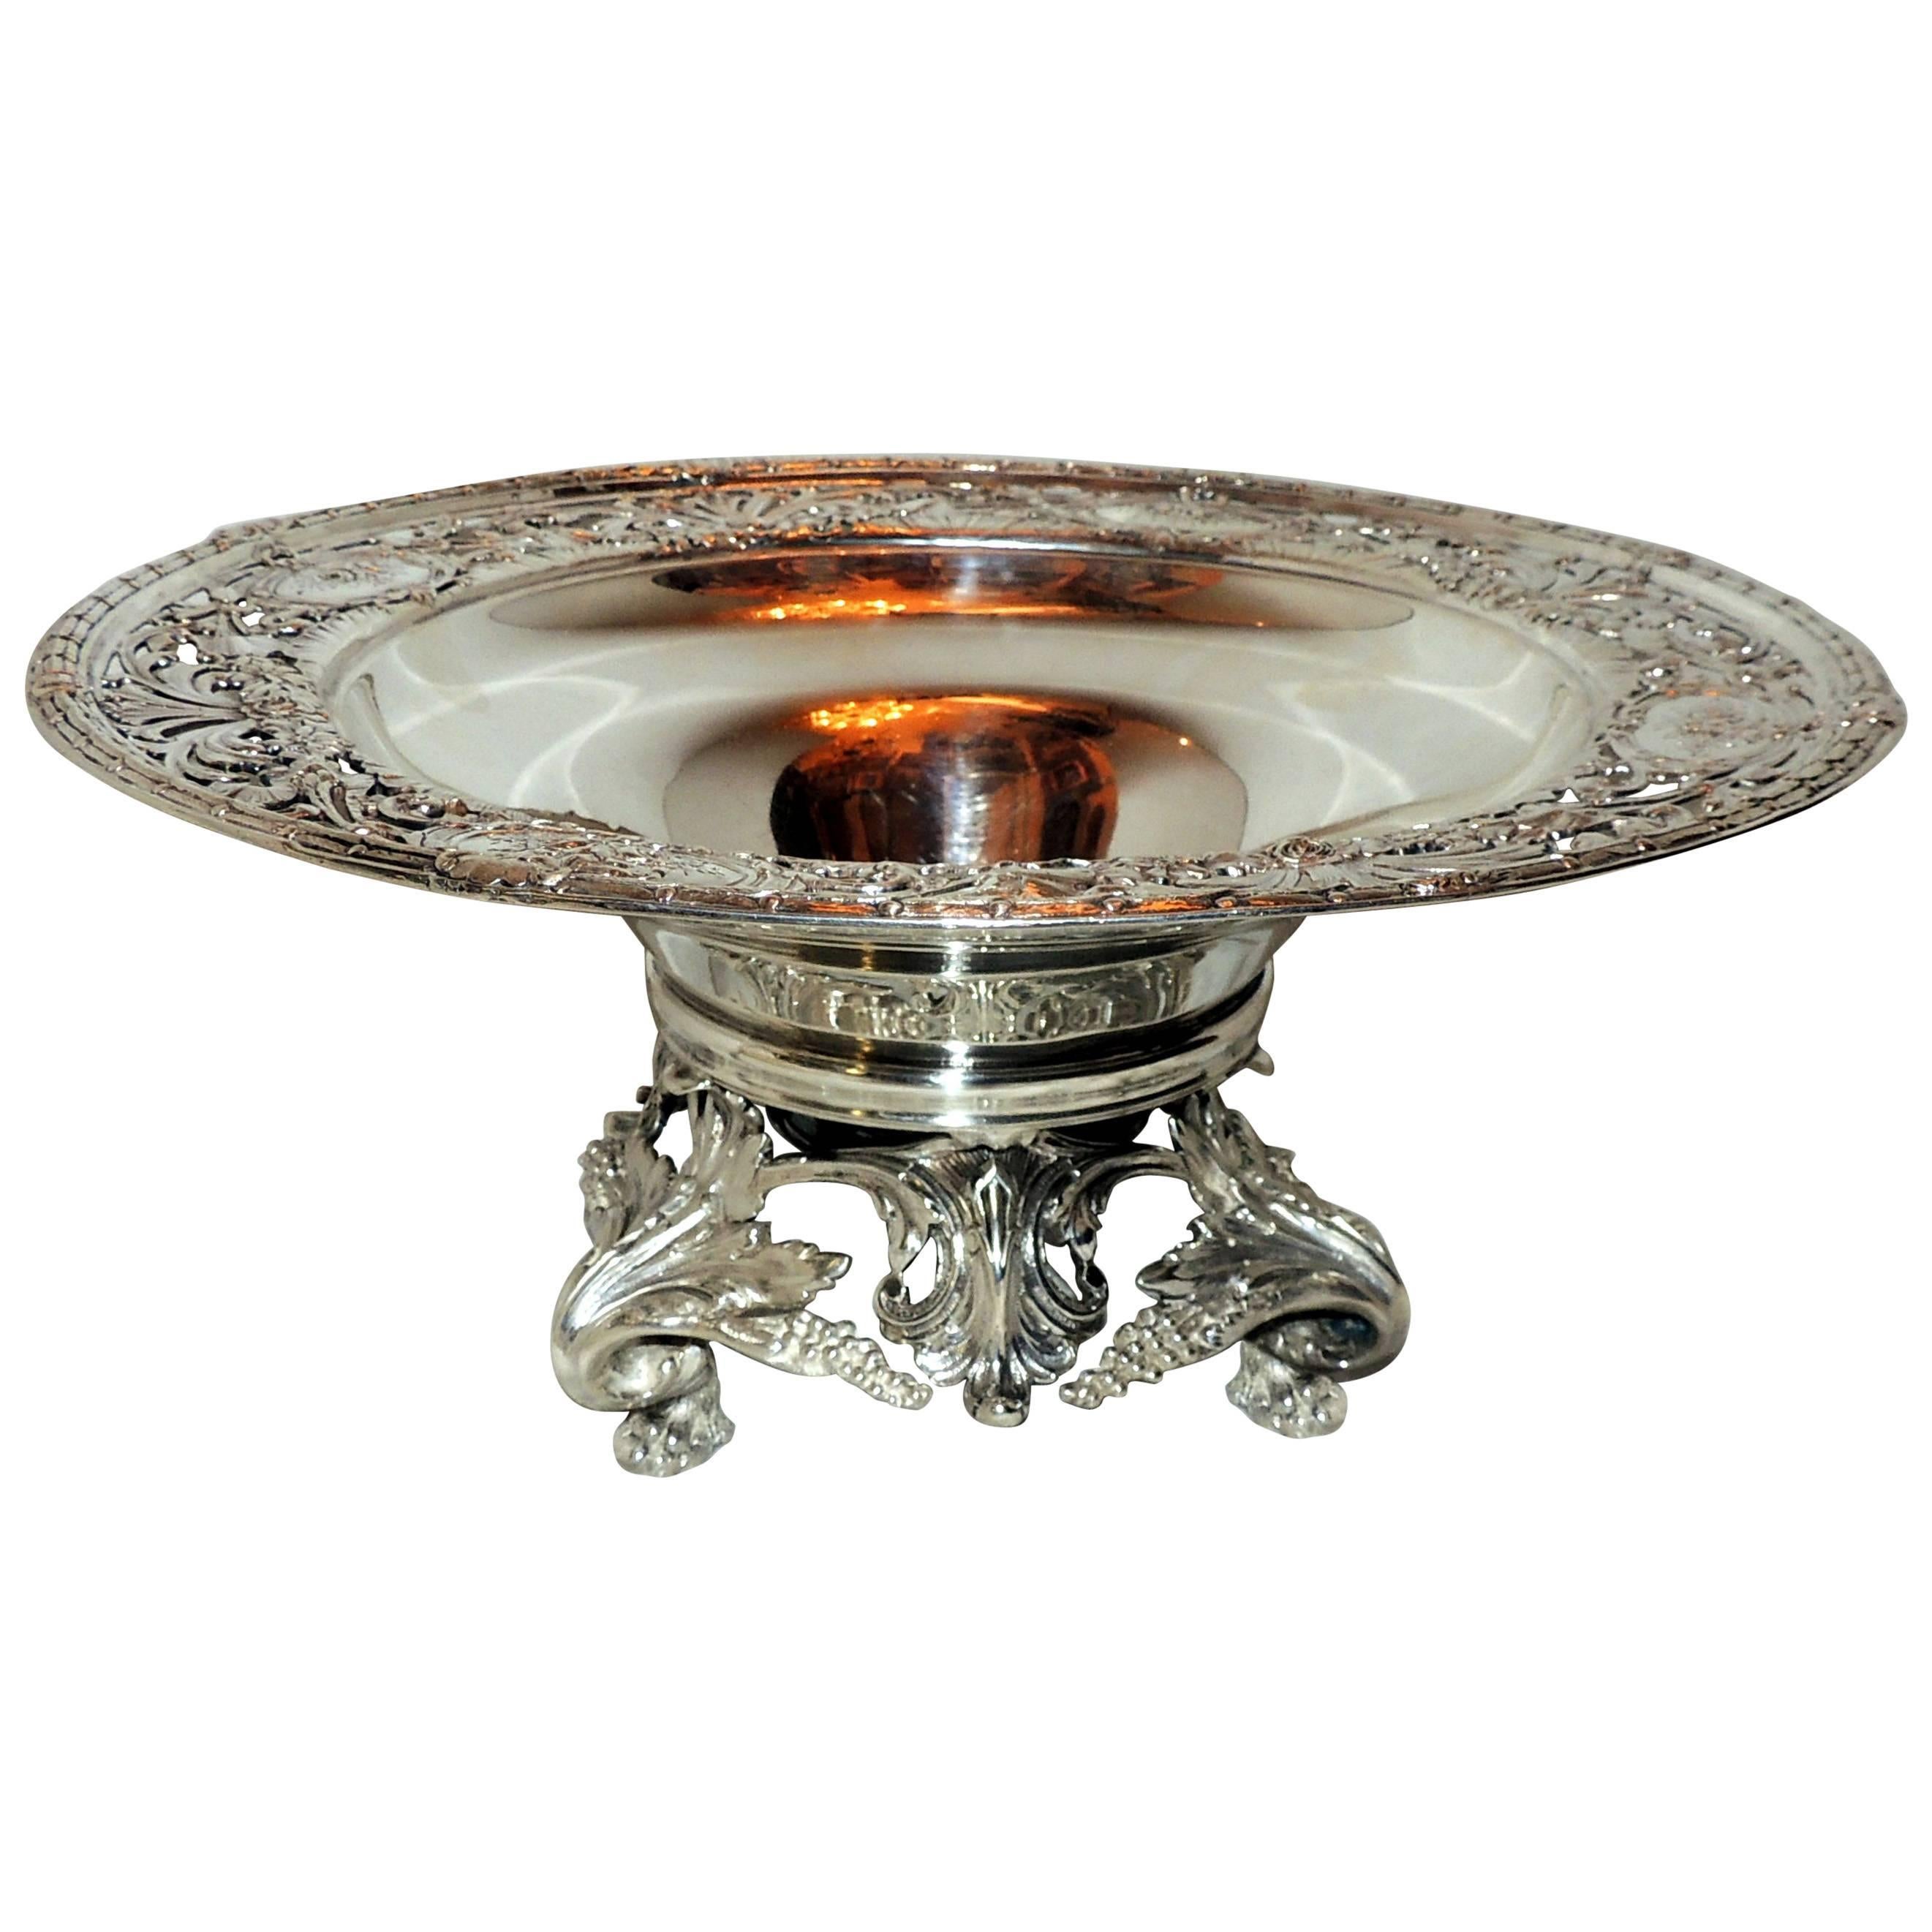 Monumental Redlich & Co. Sterling Silver Footed Floral Pierced Bowl Centerpiece